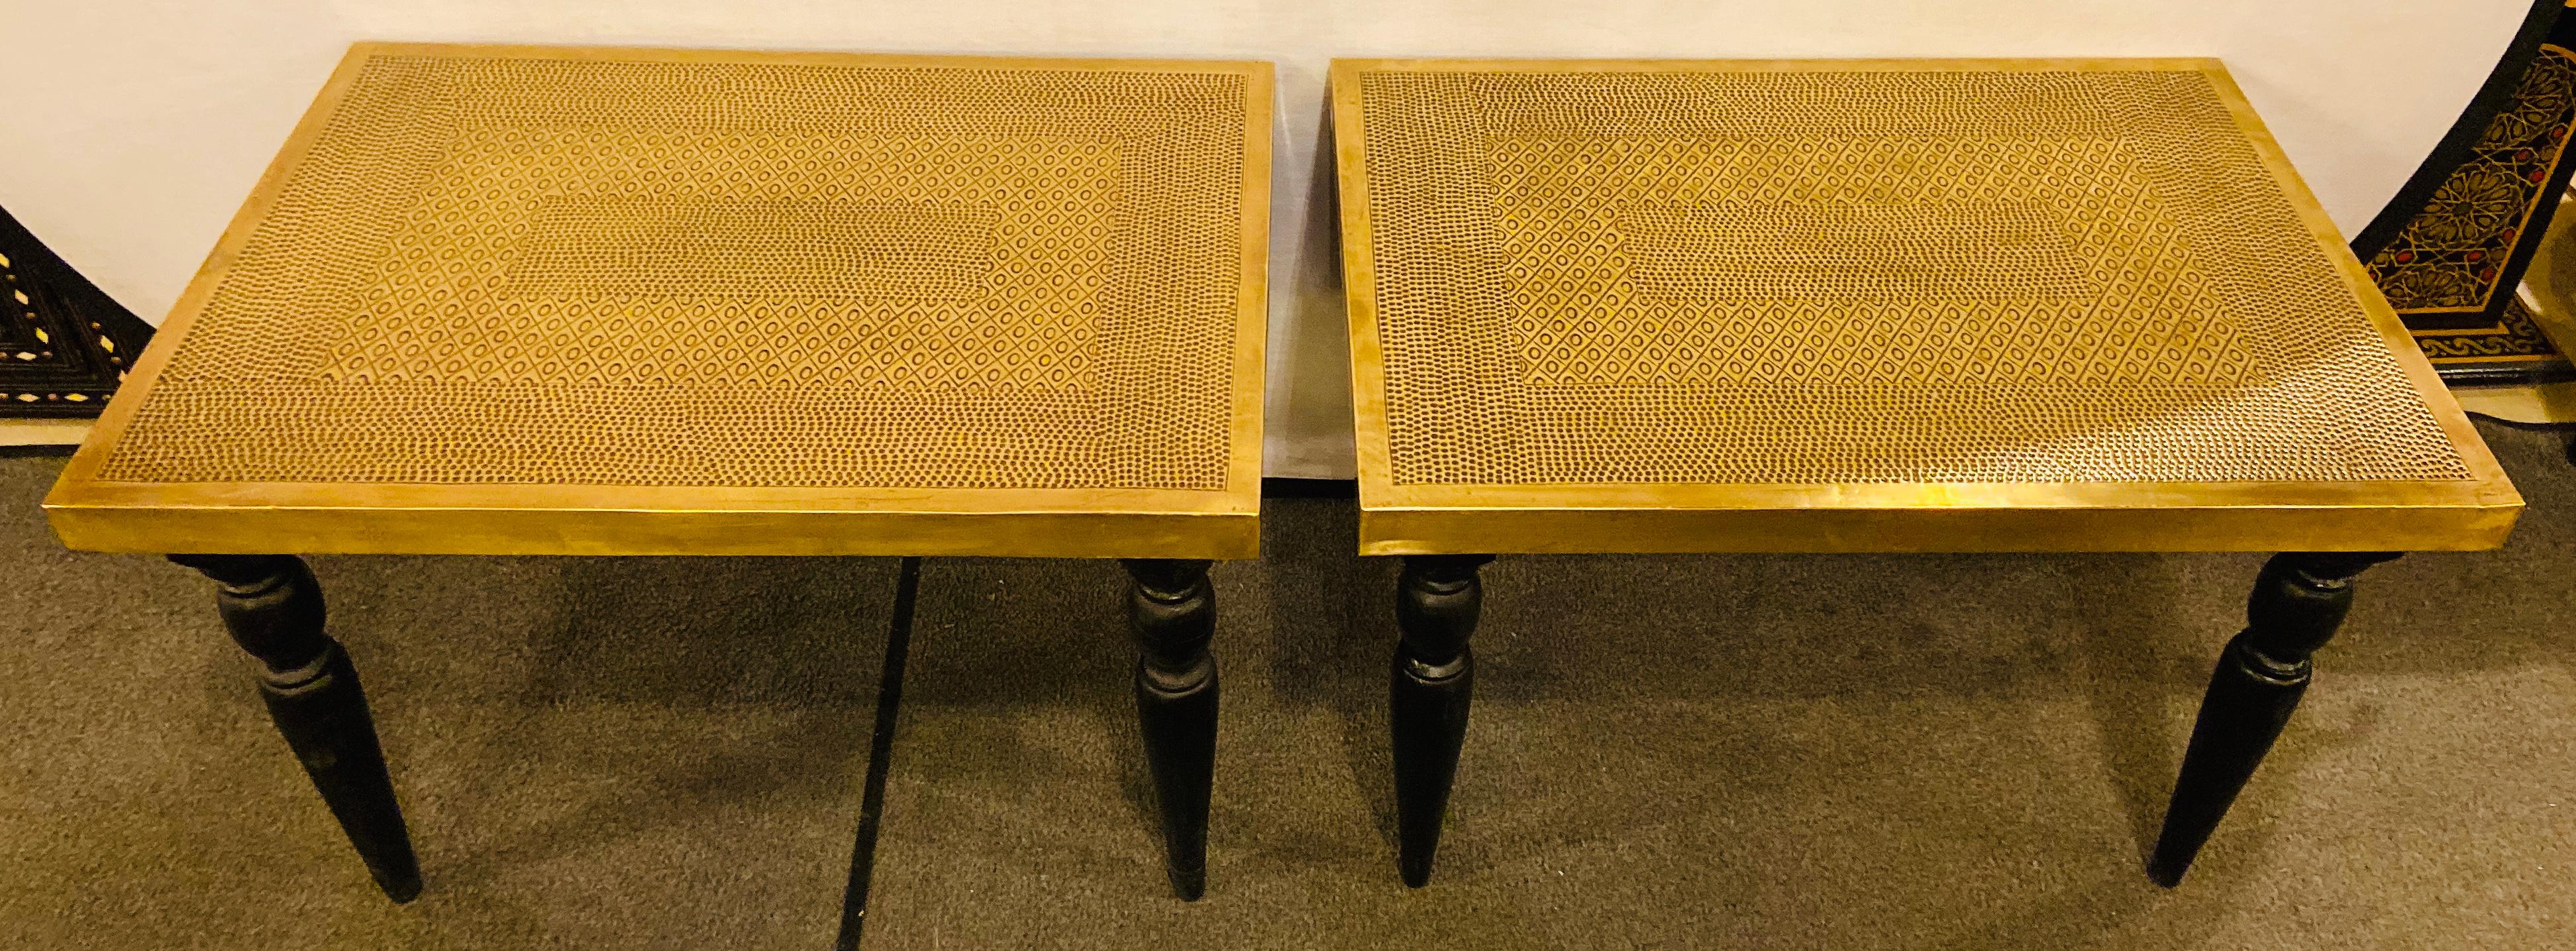 Hollywood Regency Style Handcrafted Brass Center or End Table, a Pair For Sale 7